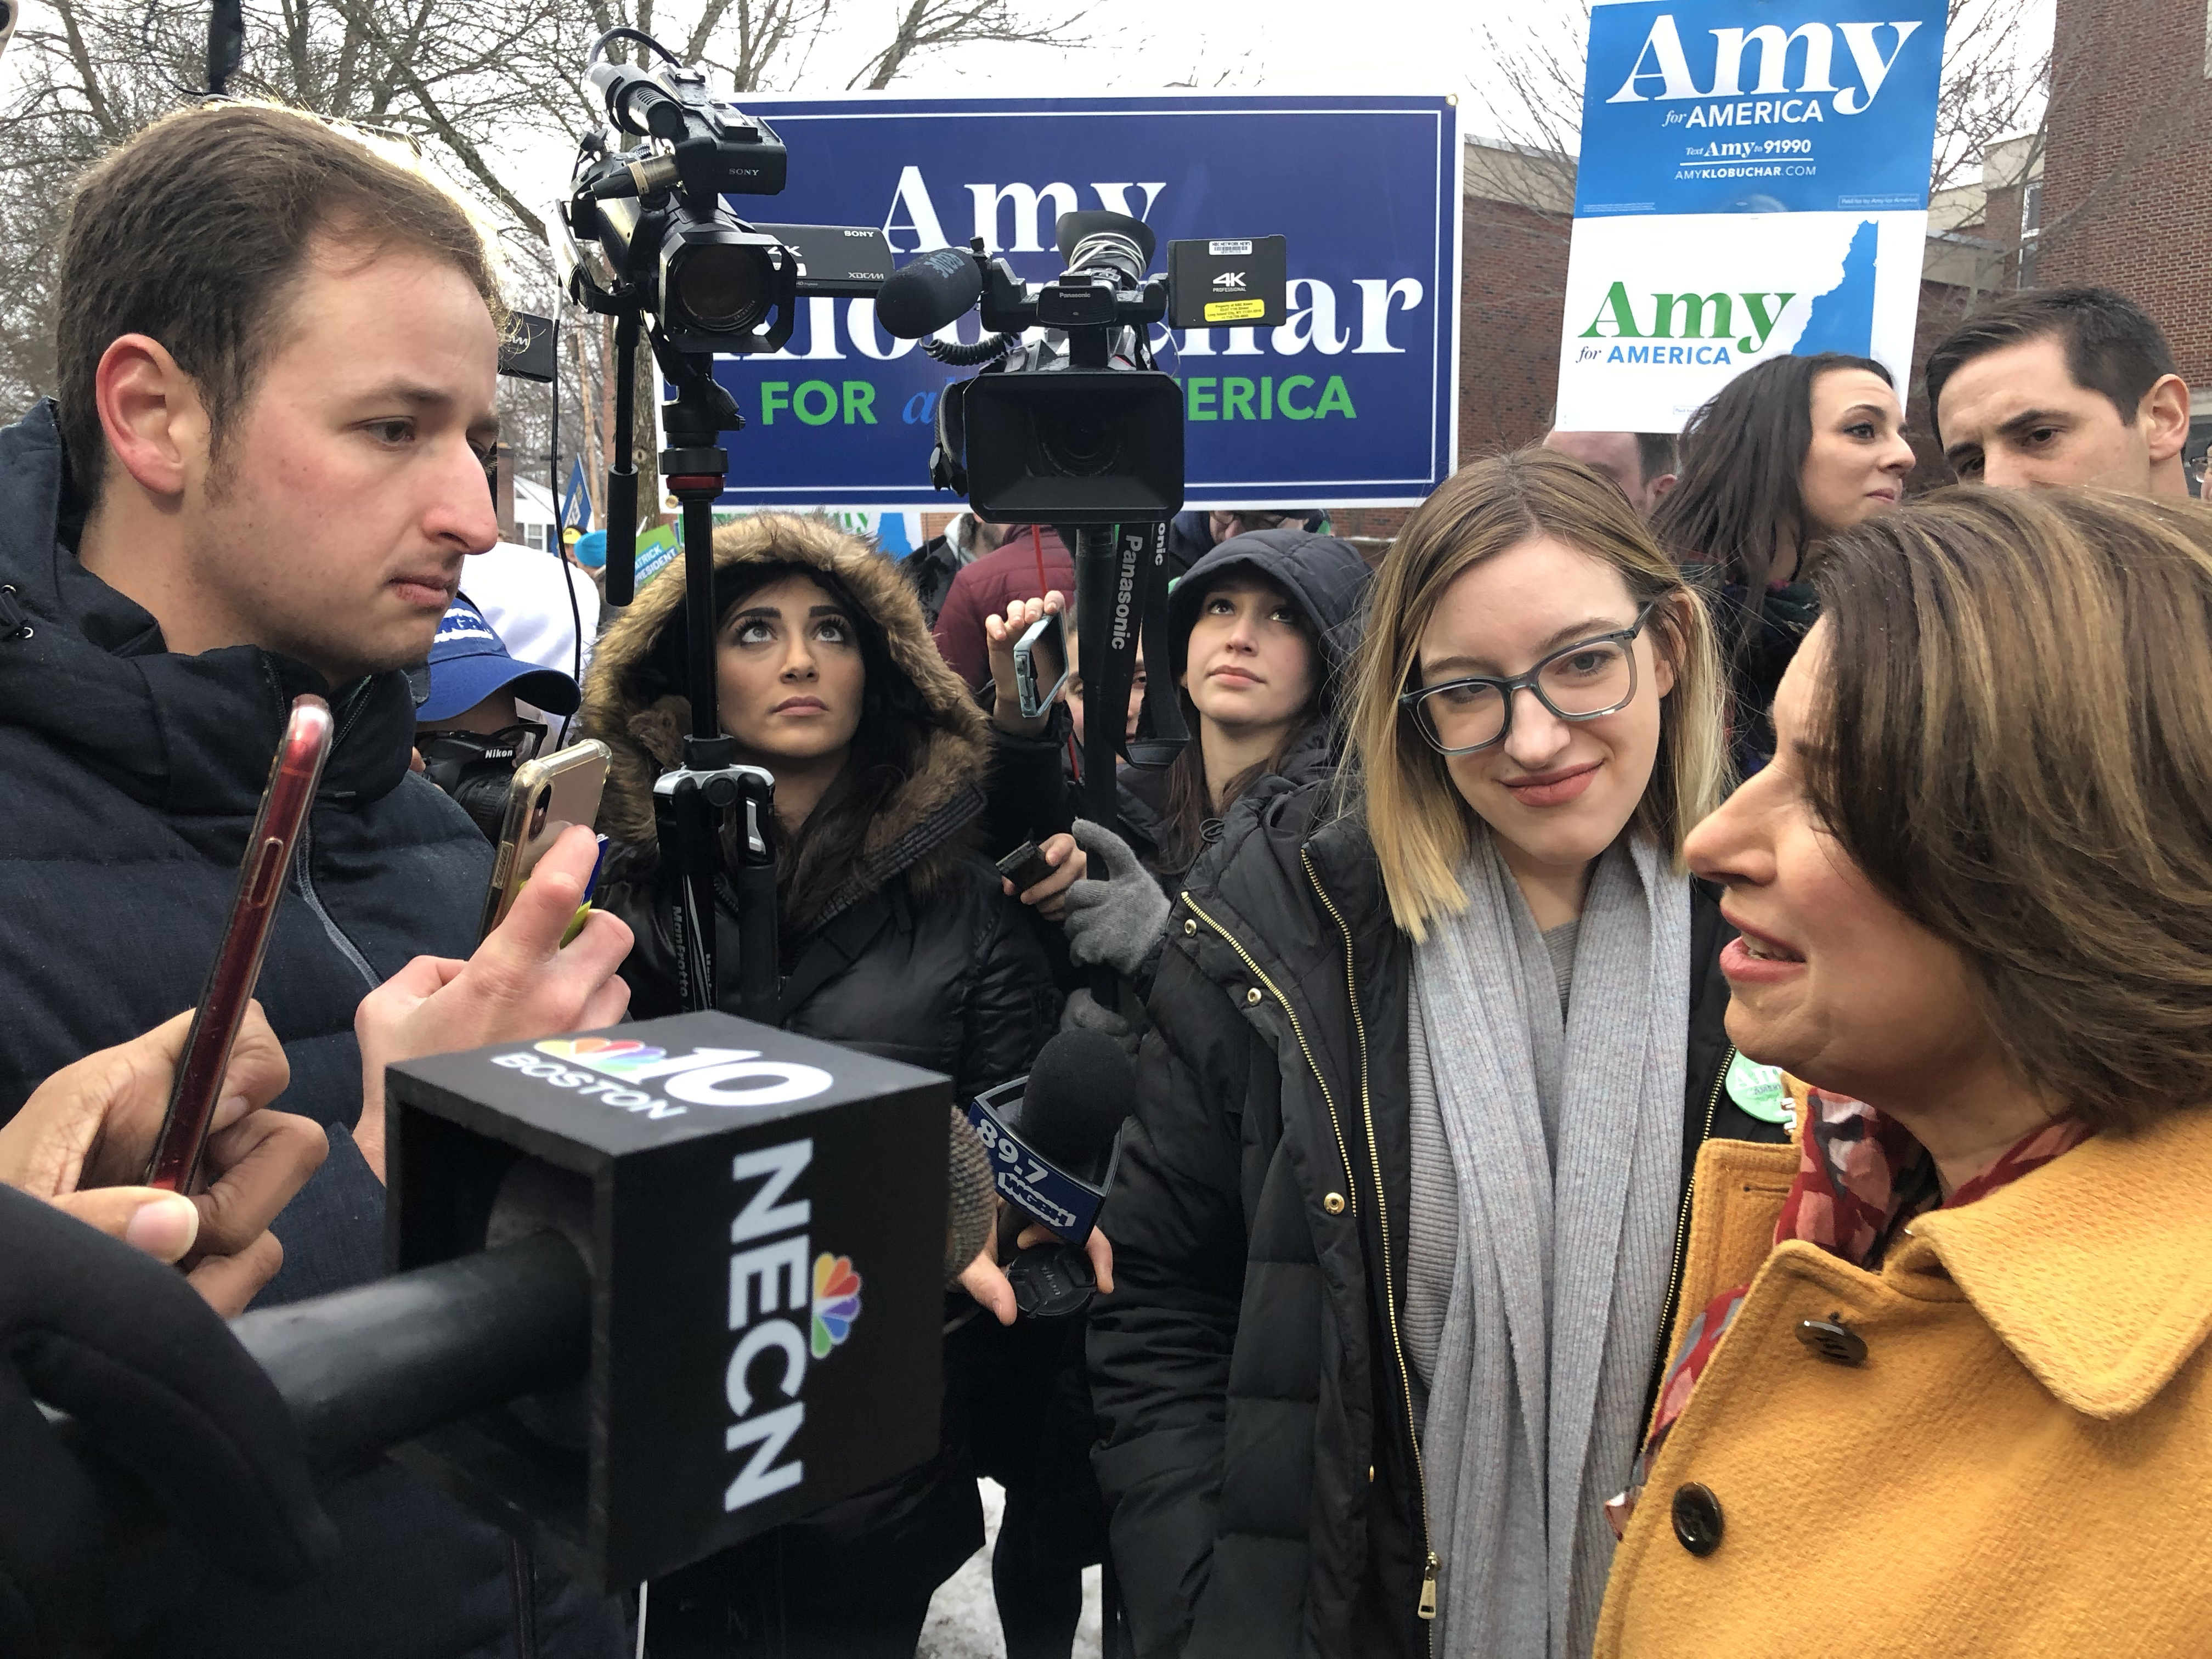 SOC student Robbie Heilberg (far left) asks Sen. Amy Klobuchar Tuesday about her chances in New Hampshire’s primary, Tuesday in Manchester, New Hampshire.